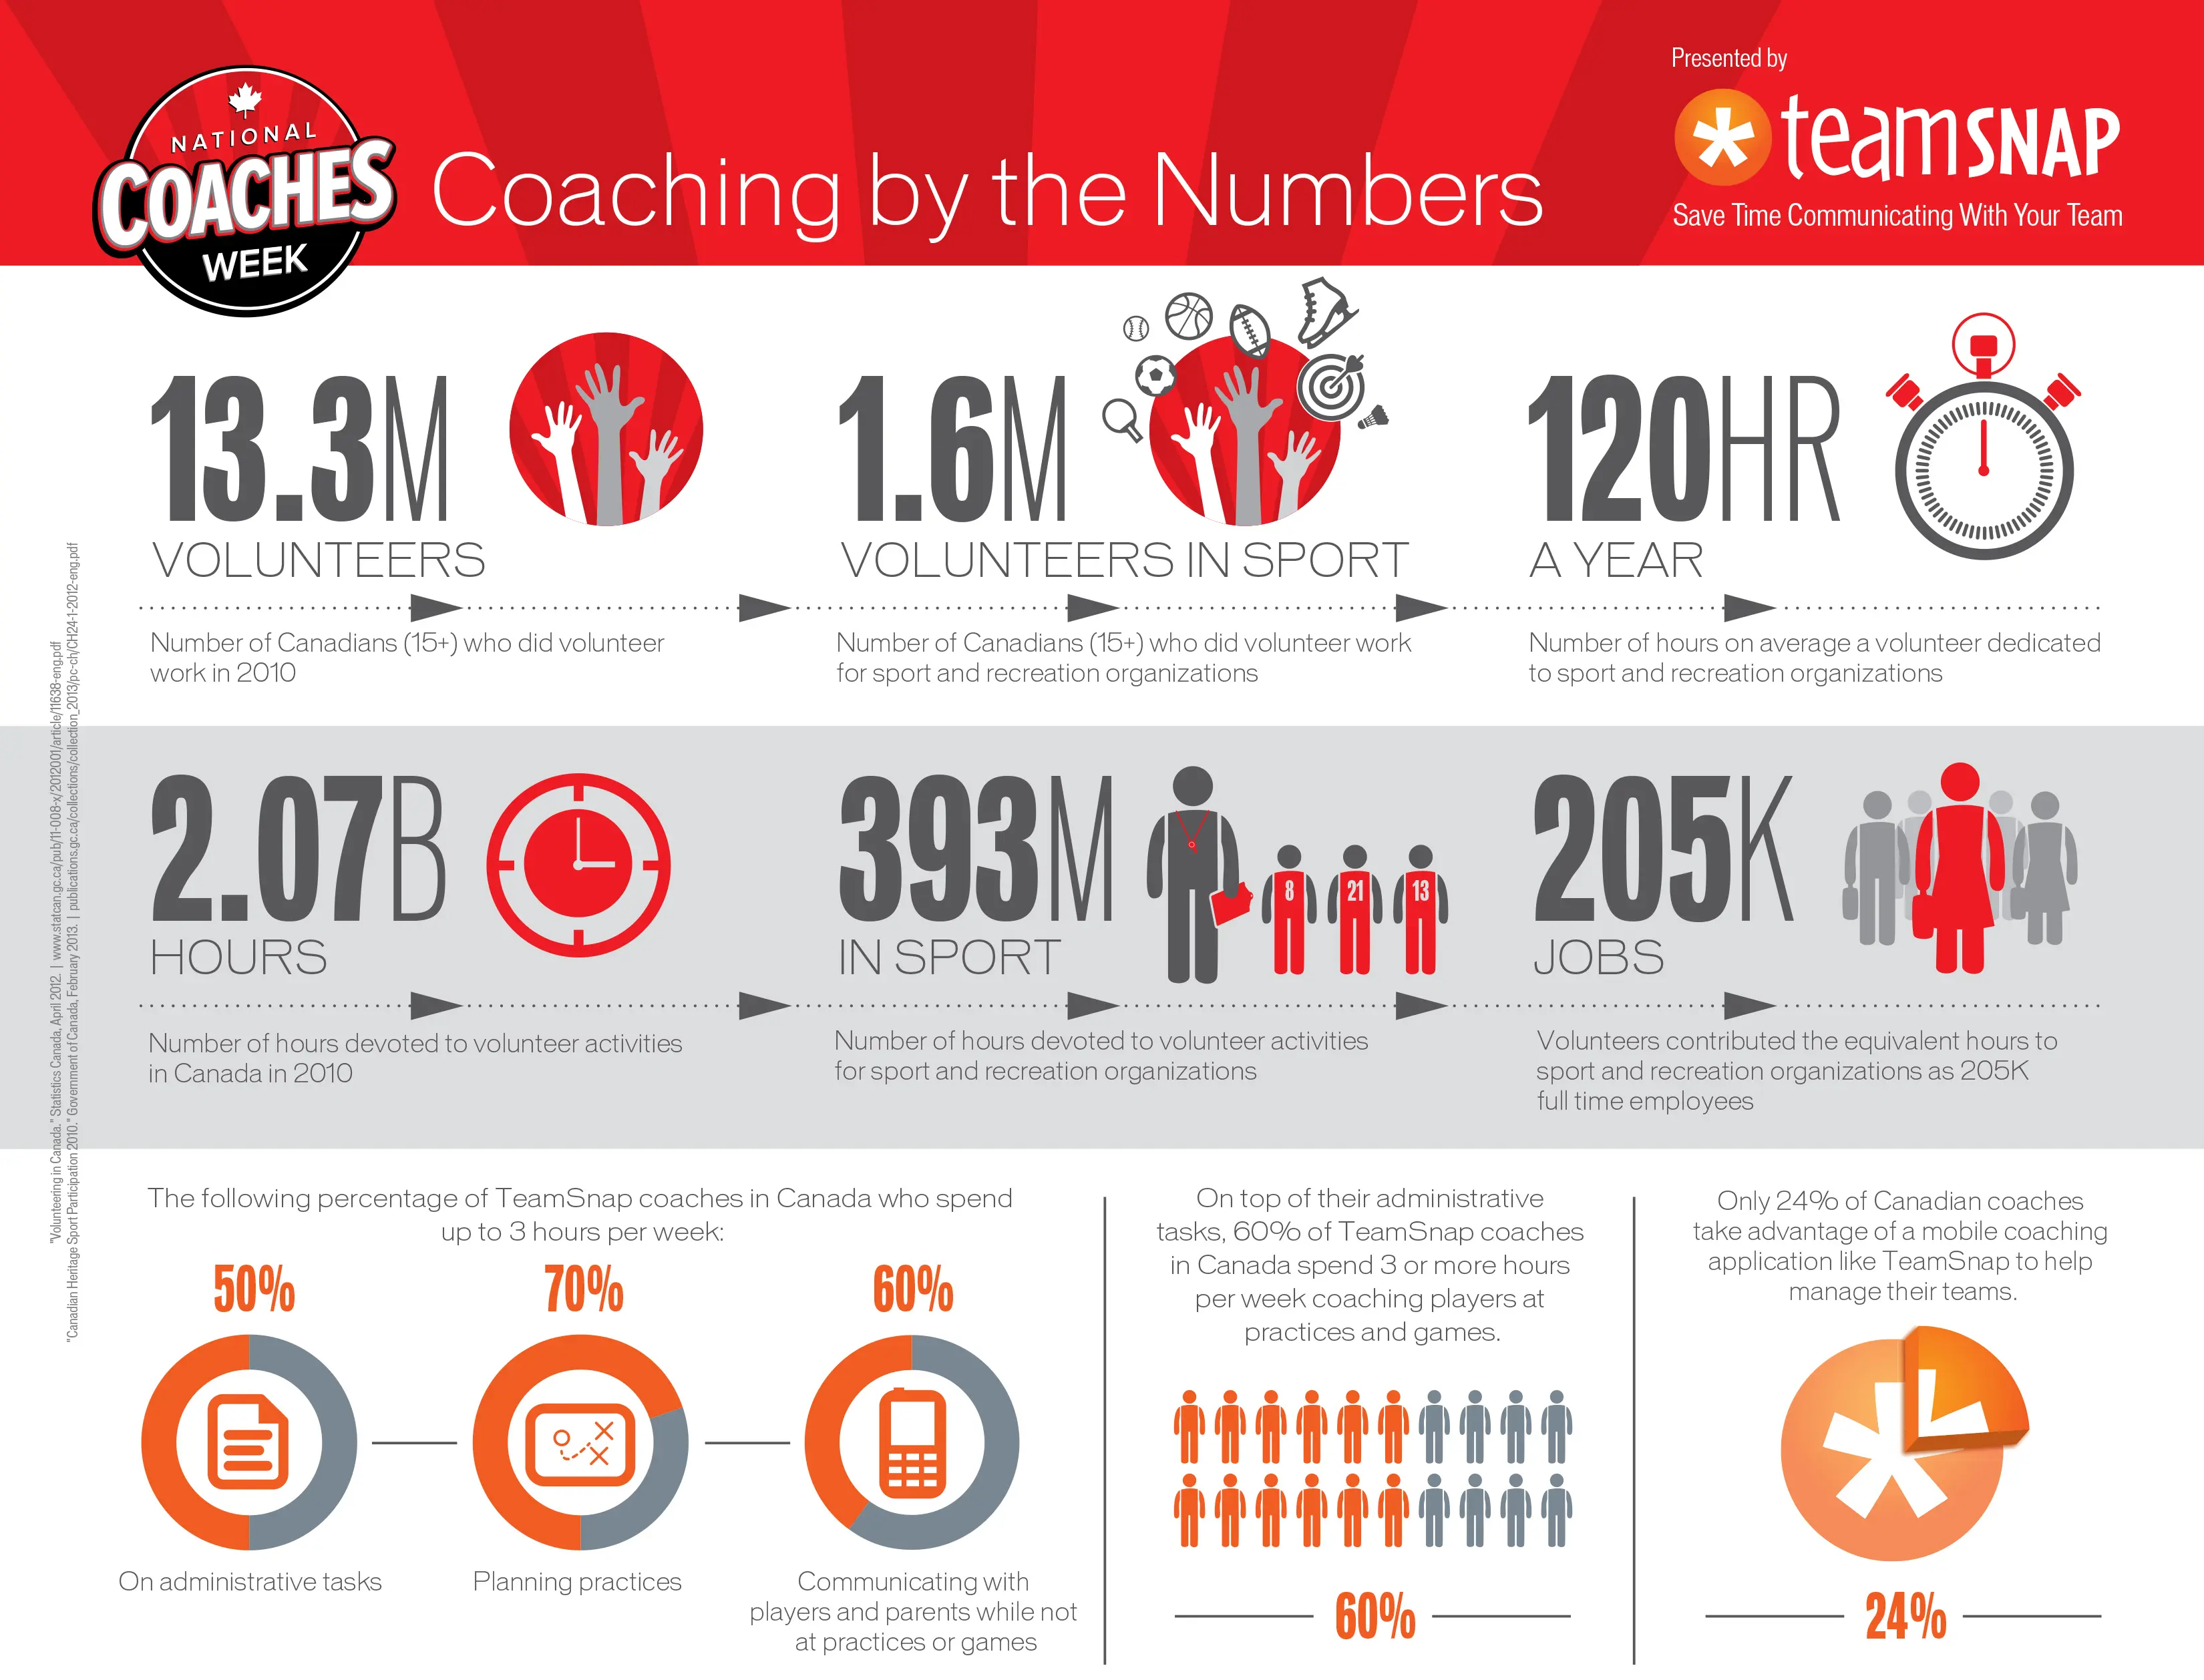 Featured image: Coaching By the Numbers